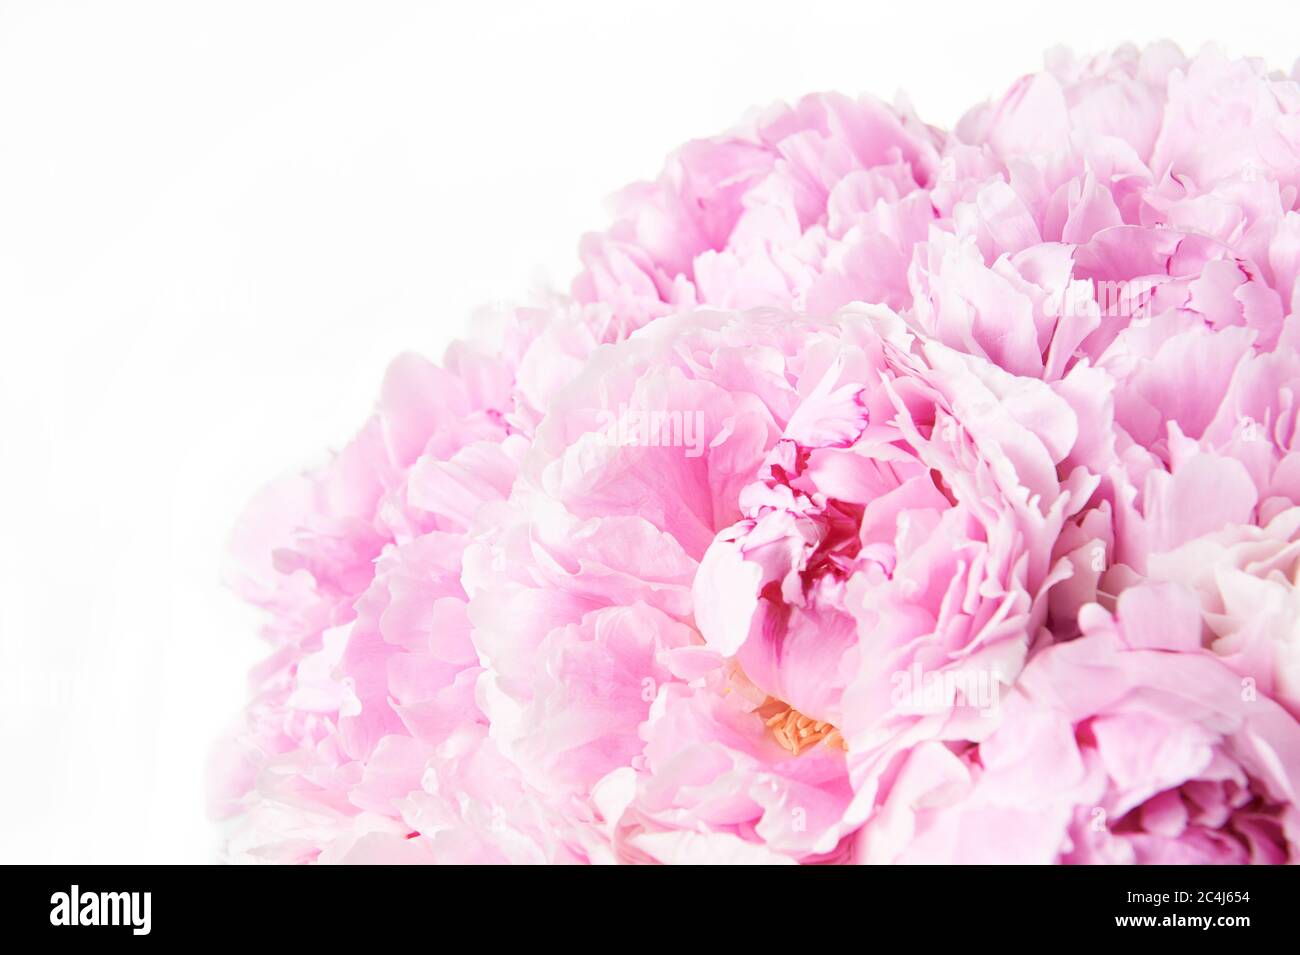 Background with beautiful pink flowers peonies. Stock Photo